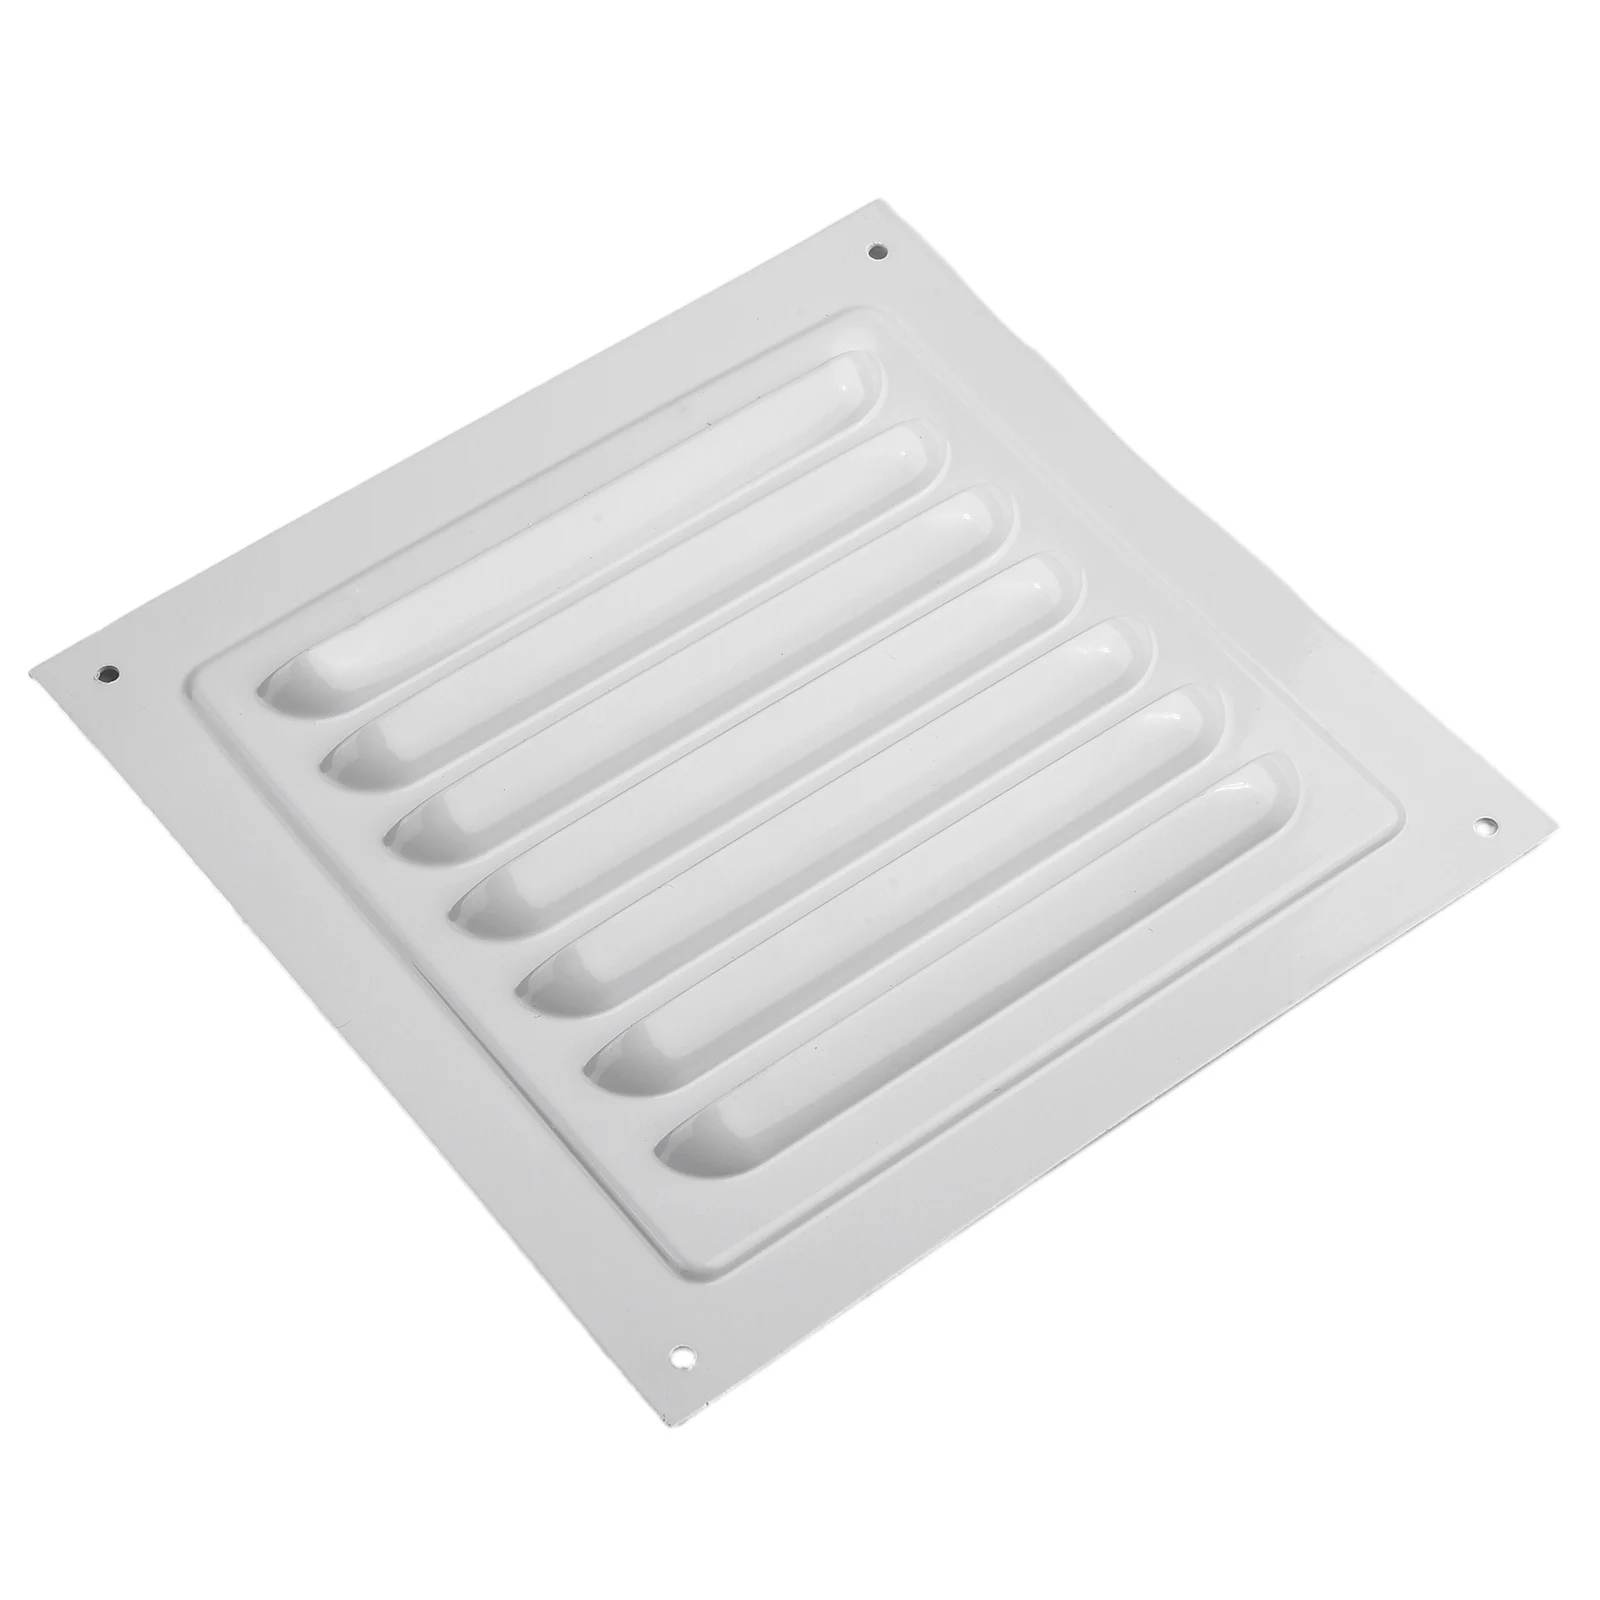 

Louver Vent Grille Cover Square Vent Insect Screen Cover Air Vent Ventilator System For Closet Shoe Air Conditioner Home Decor